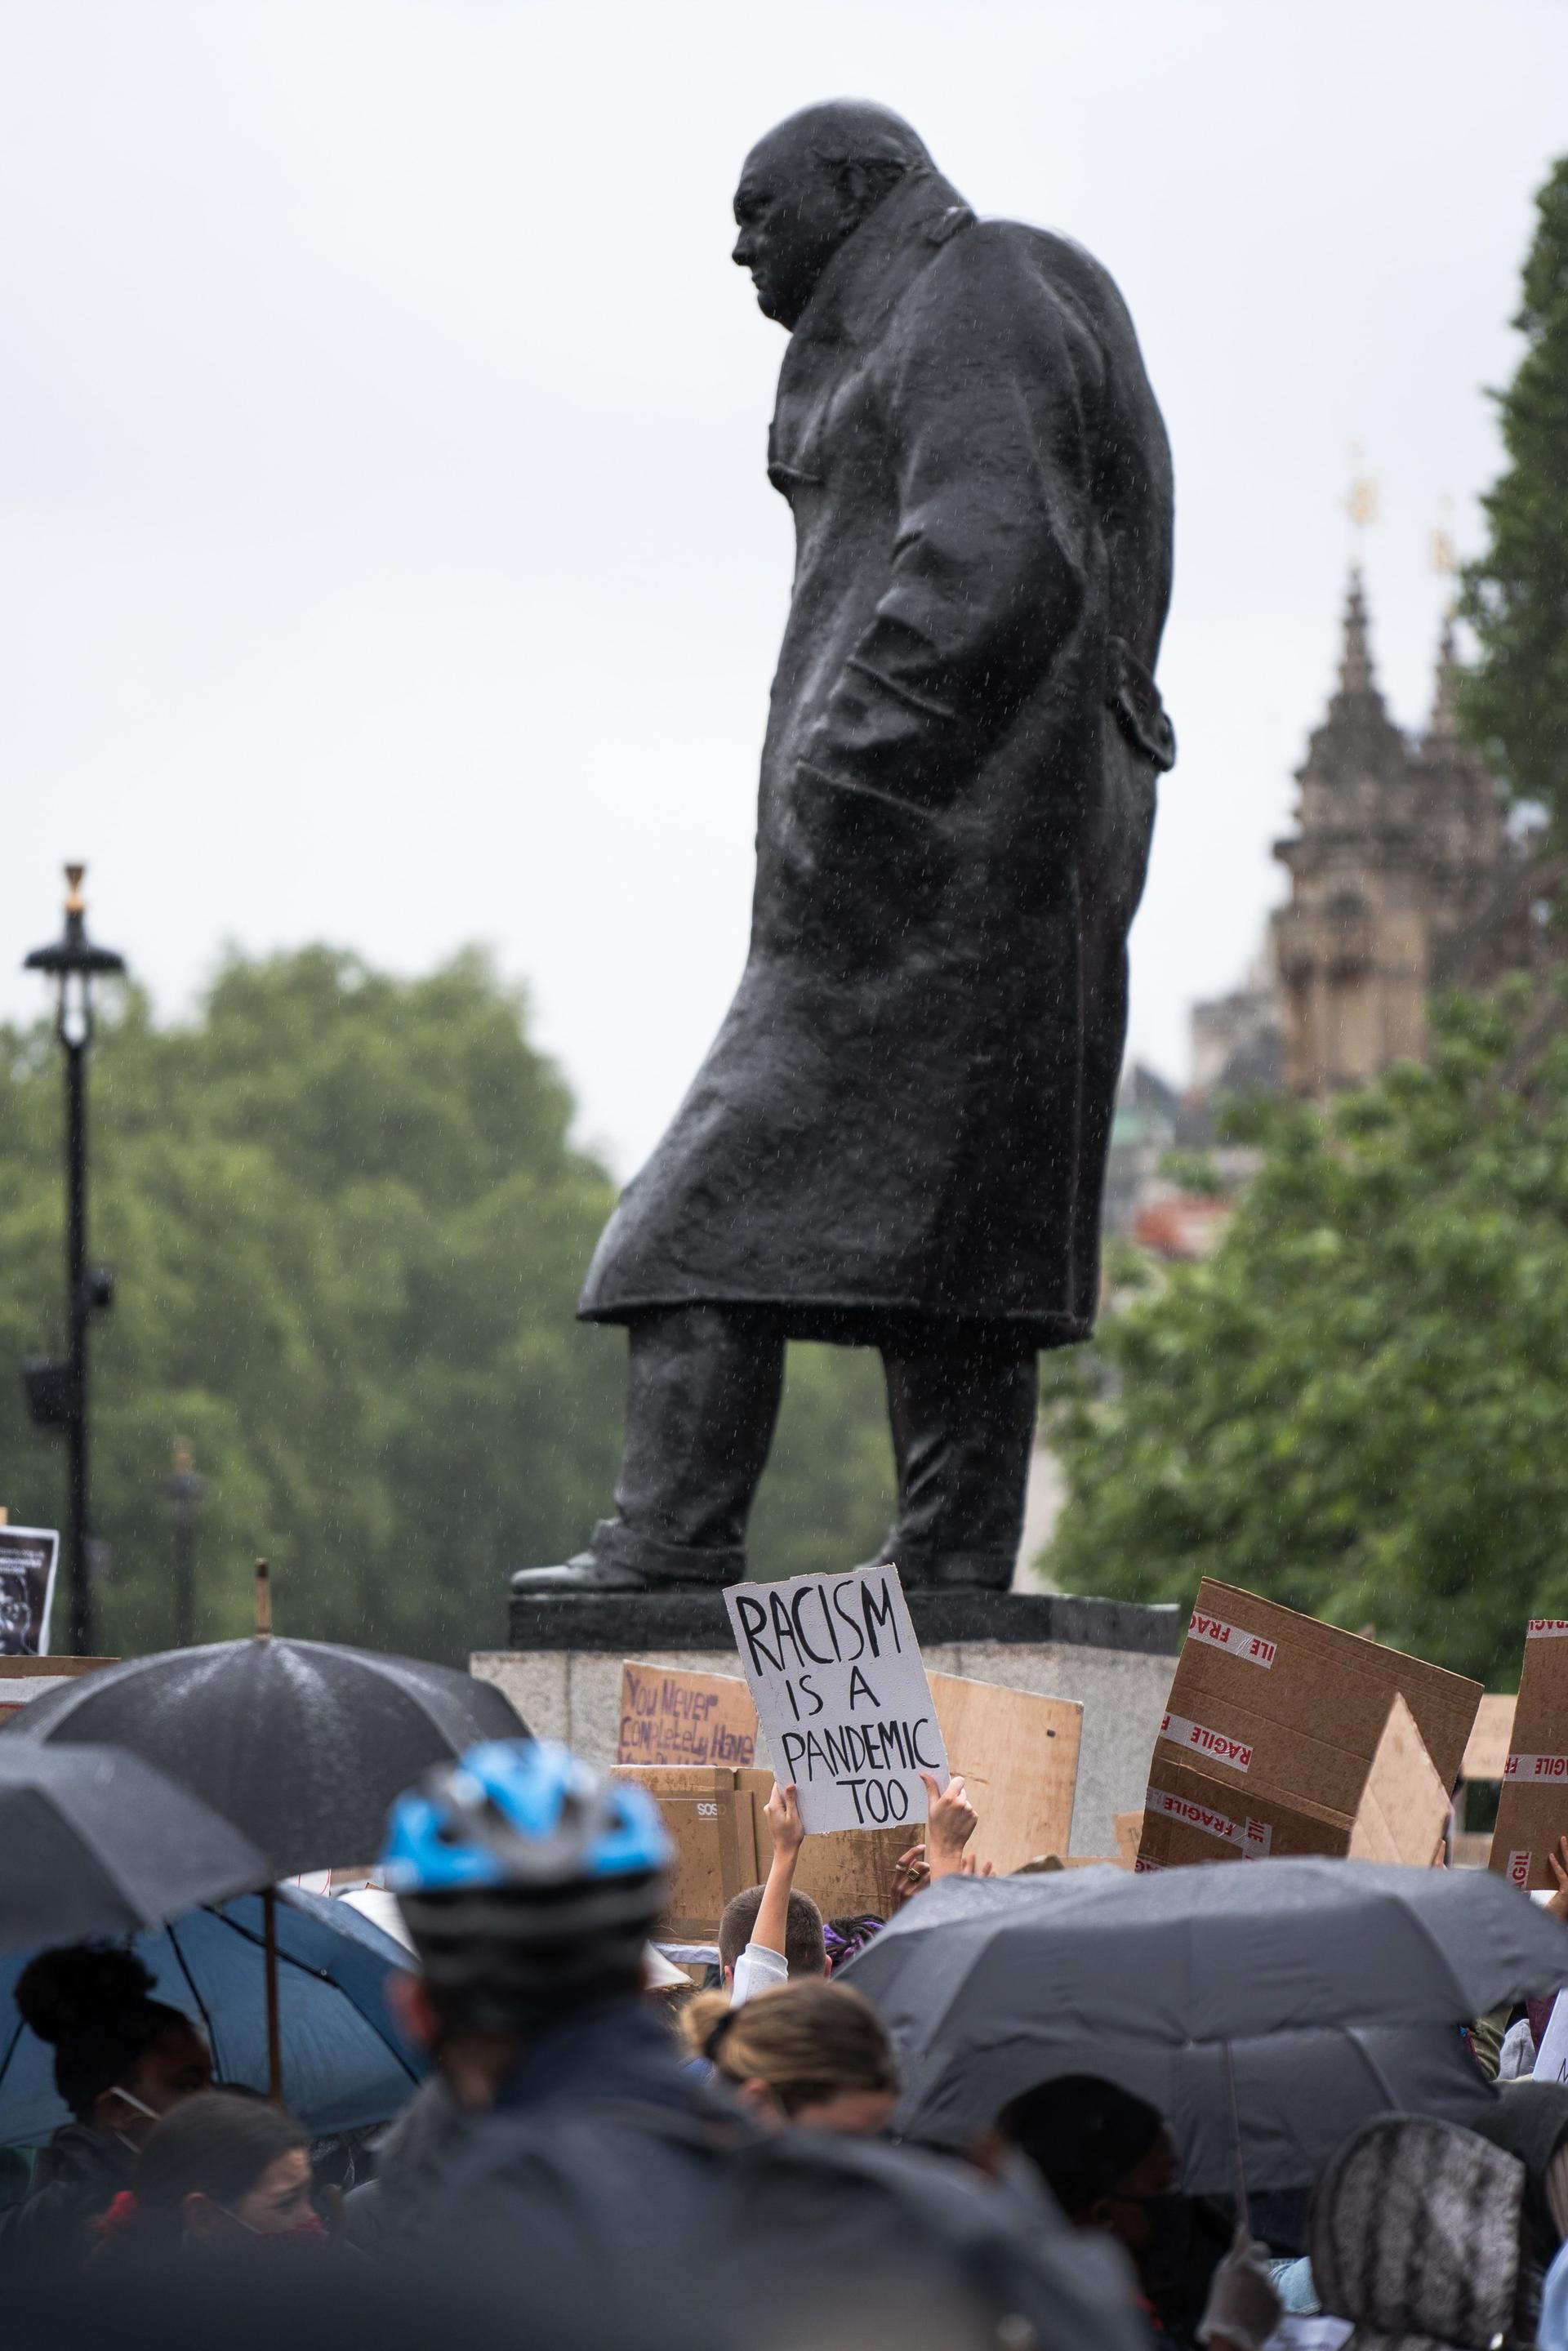 A statute of Winston Churrchill in London. Beneath the statute a protest is taking place.